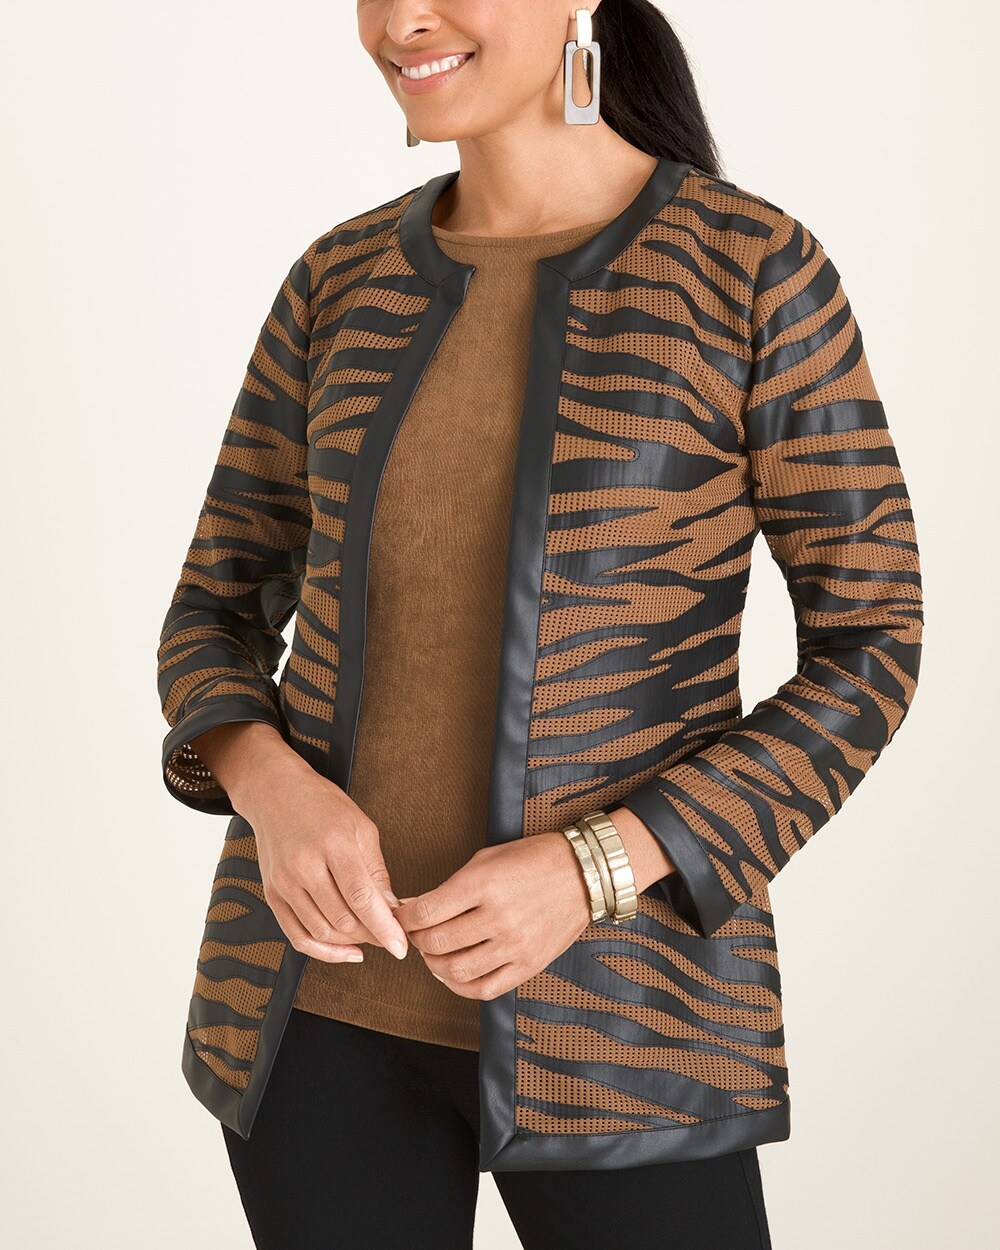 Travelers Collection Striped Mesh Jacket